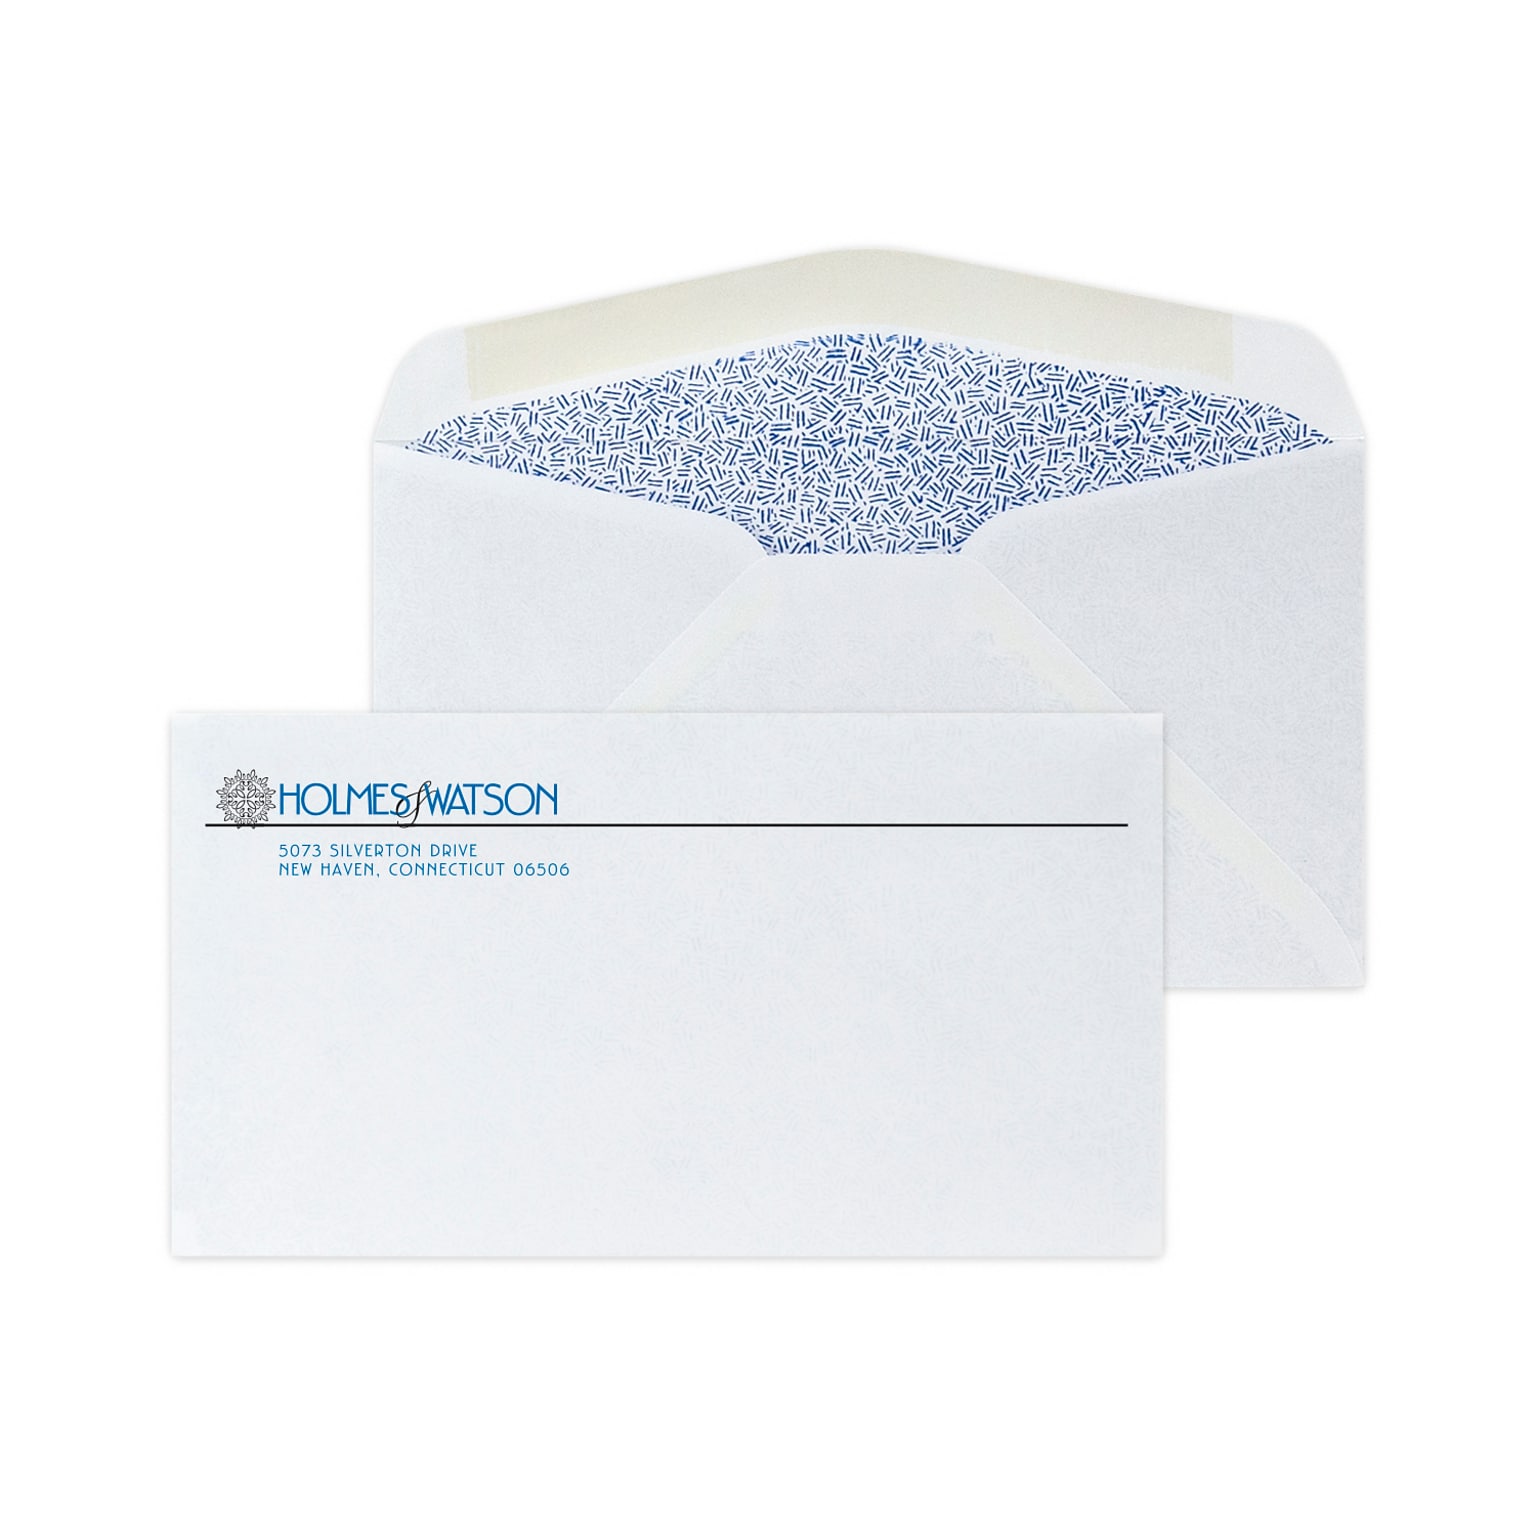 Custom #6-3/4 Diagonal Seam Standard Envelopes with Security Tint, 3 5/8 x 6 1/2, 24# White Wove, 2 Standard Inks, 250 / Pack